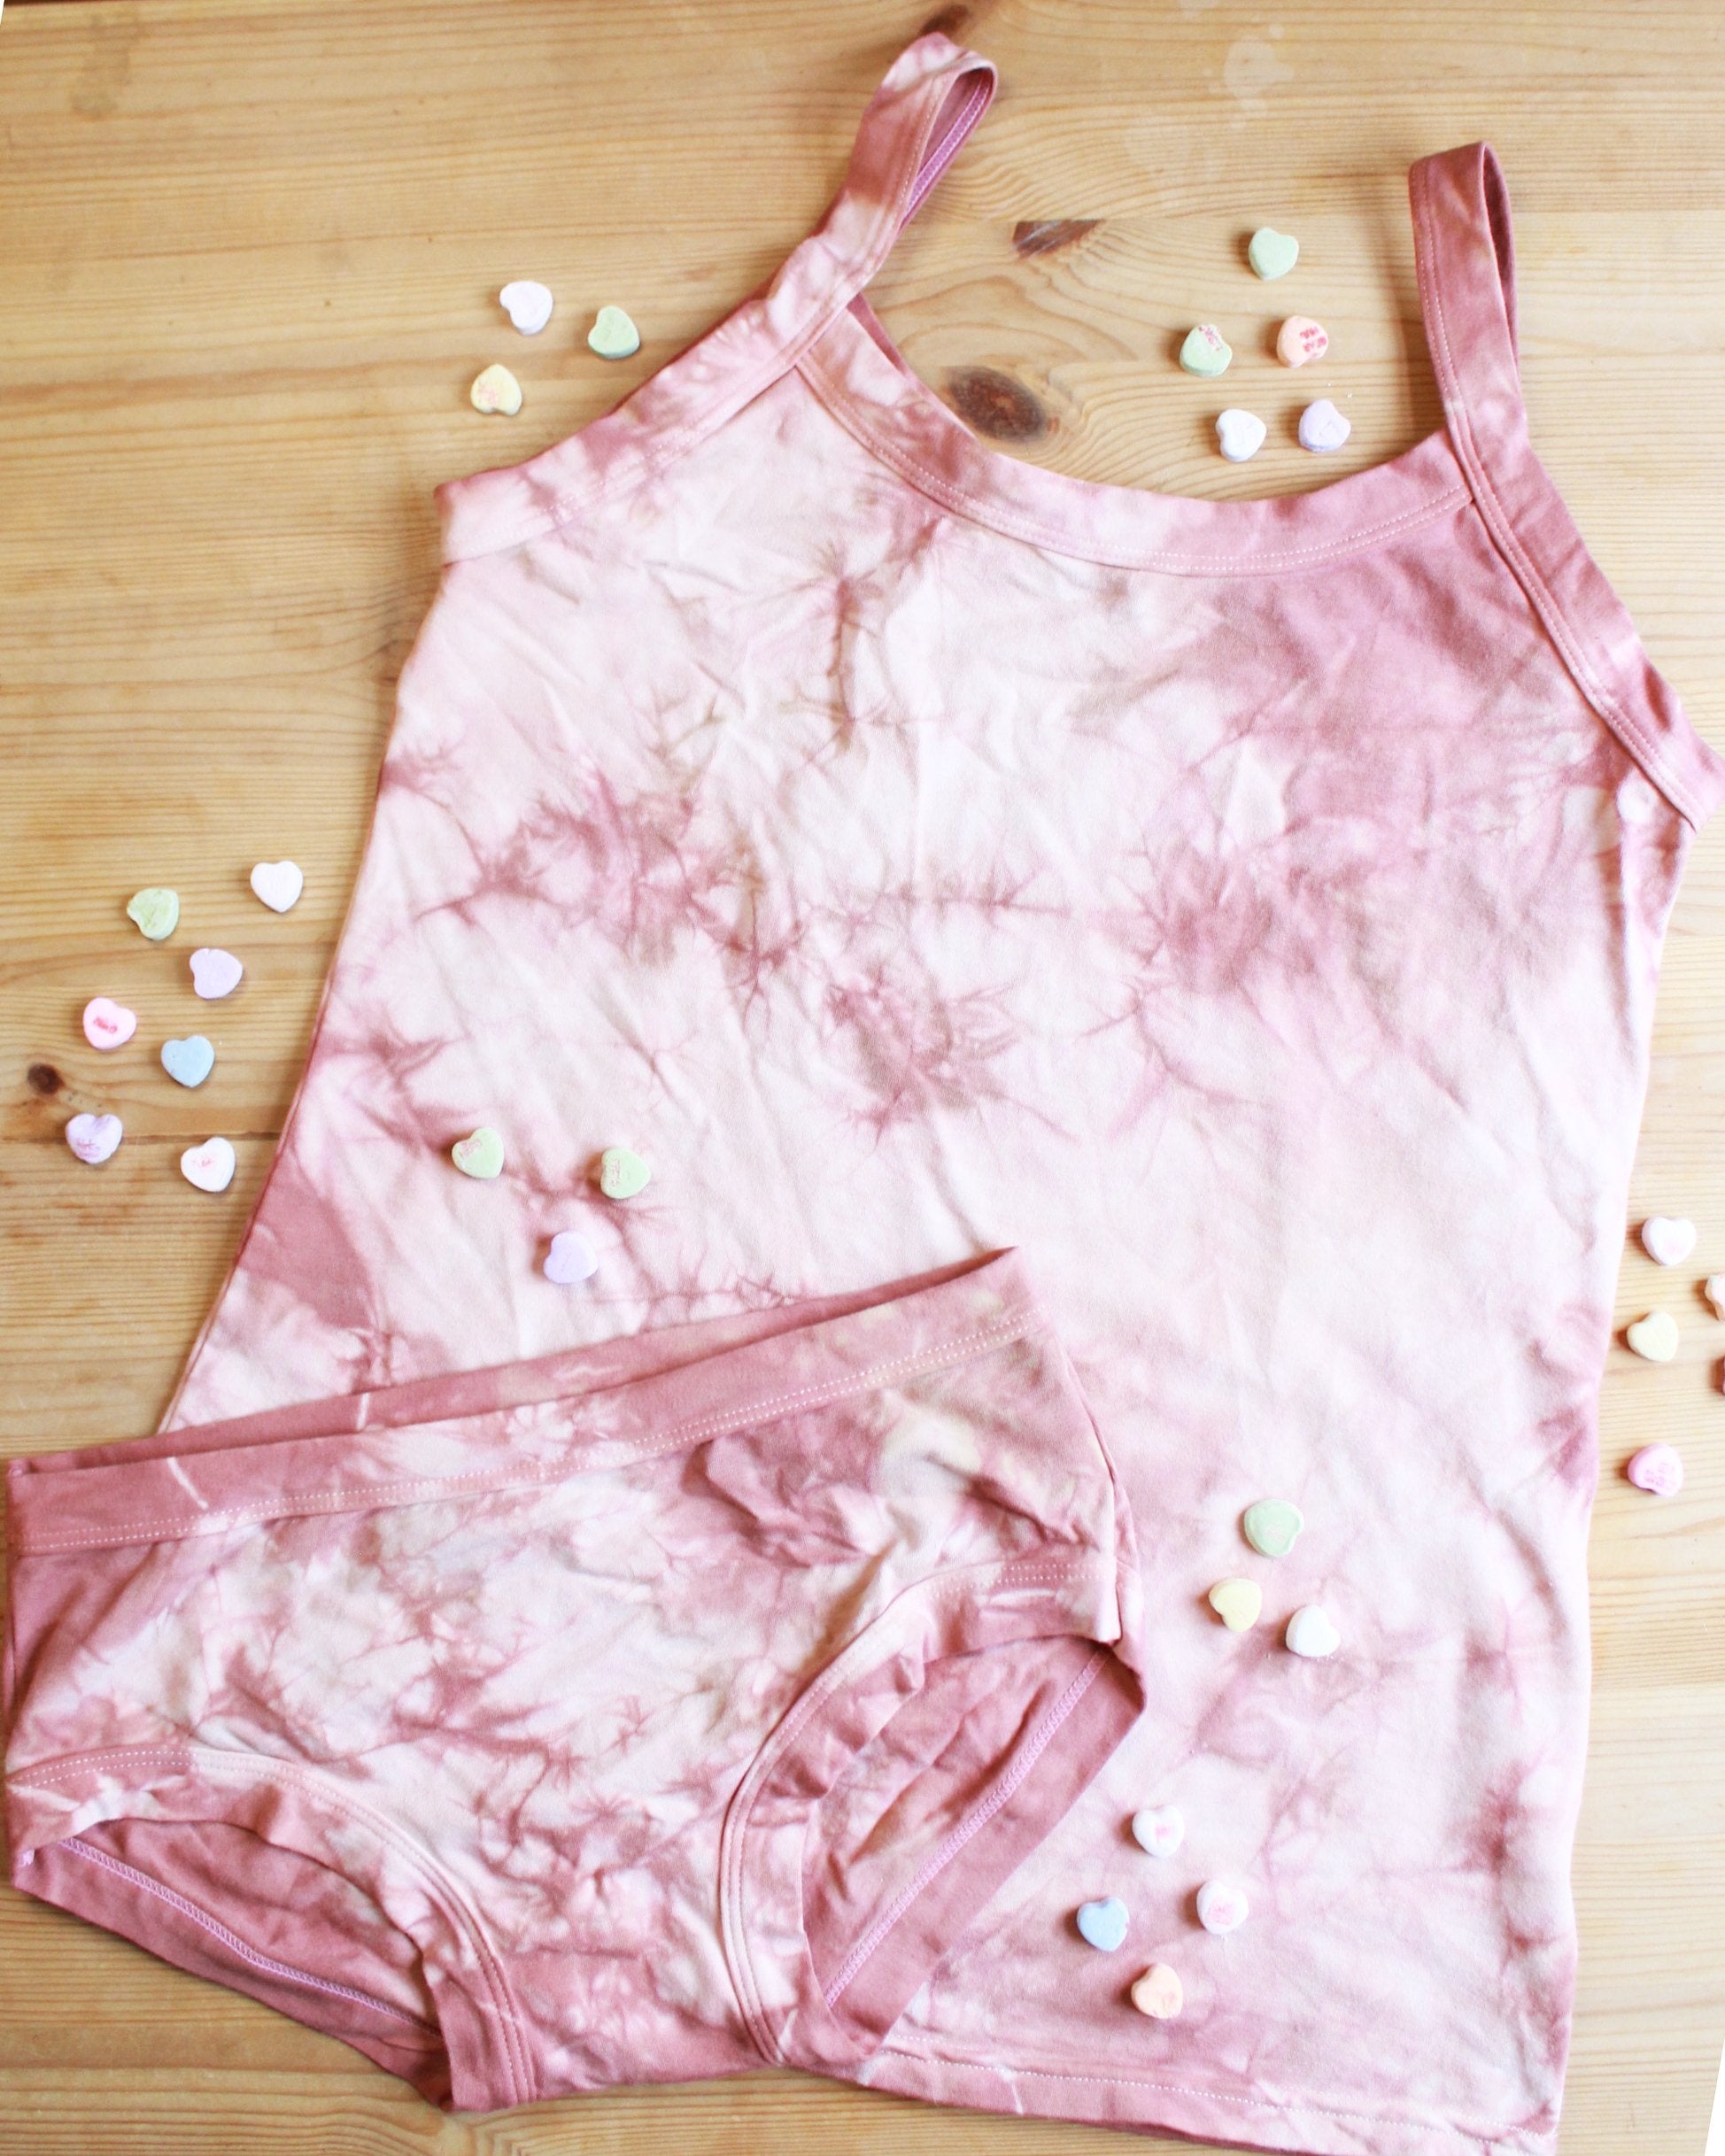 Flat-lay of Thunderpants organic cotton Camisole and Women's Hipster Style underwear in limited edition hand dyed pink tie dye.